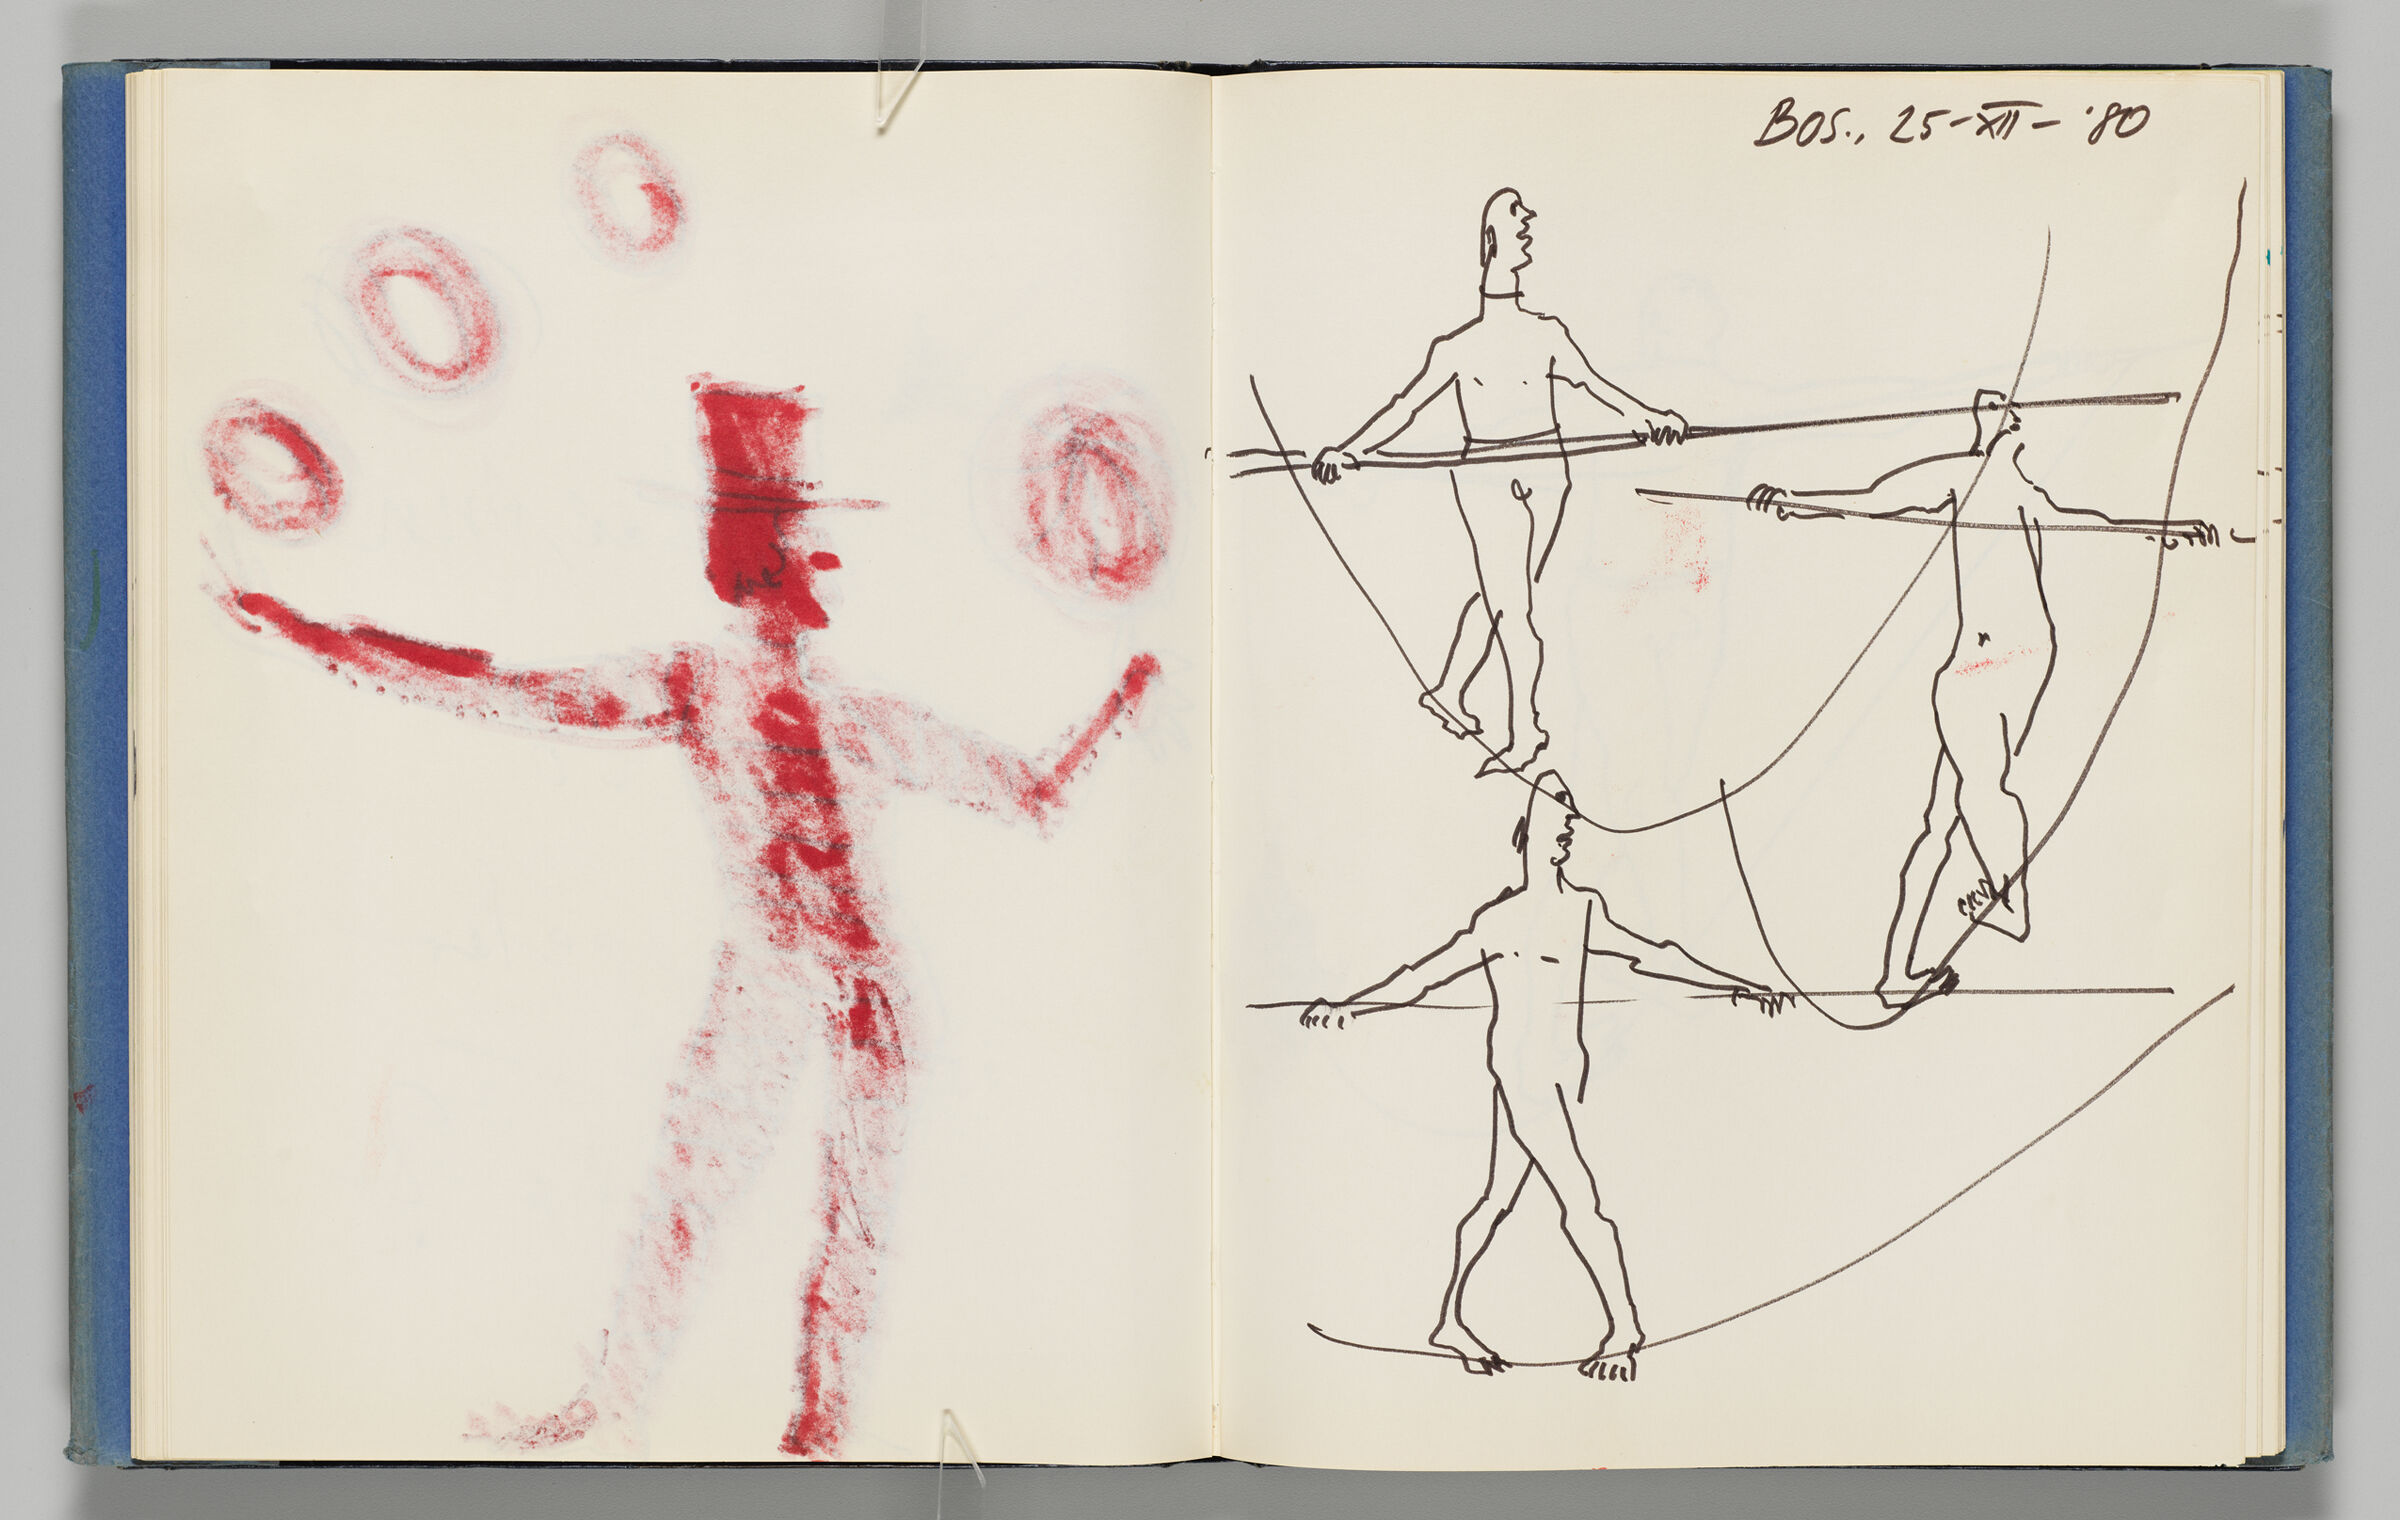 Untitled (Bleed-Through Of Previous Page, Left Page); Untitled (Tightrope Walkers, Right Page)